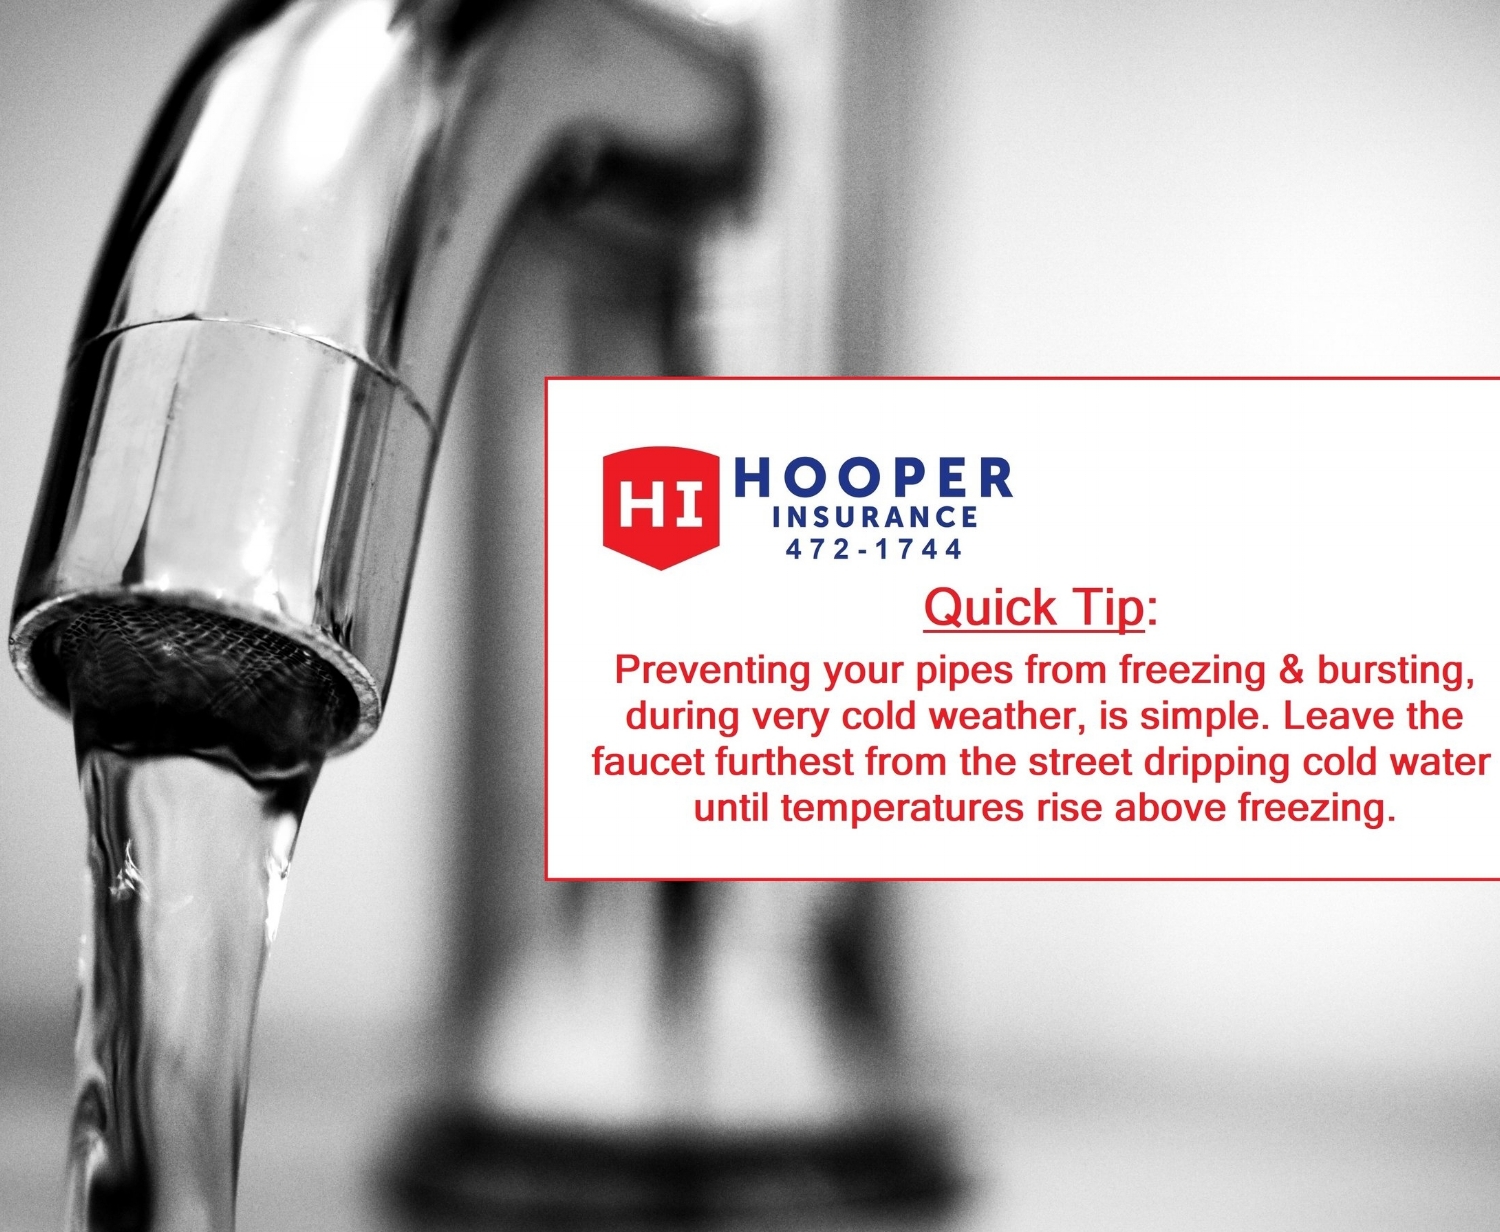 Quick Tip Preventing Freezing Pipes Part Ii Hooper Insurance